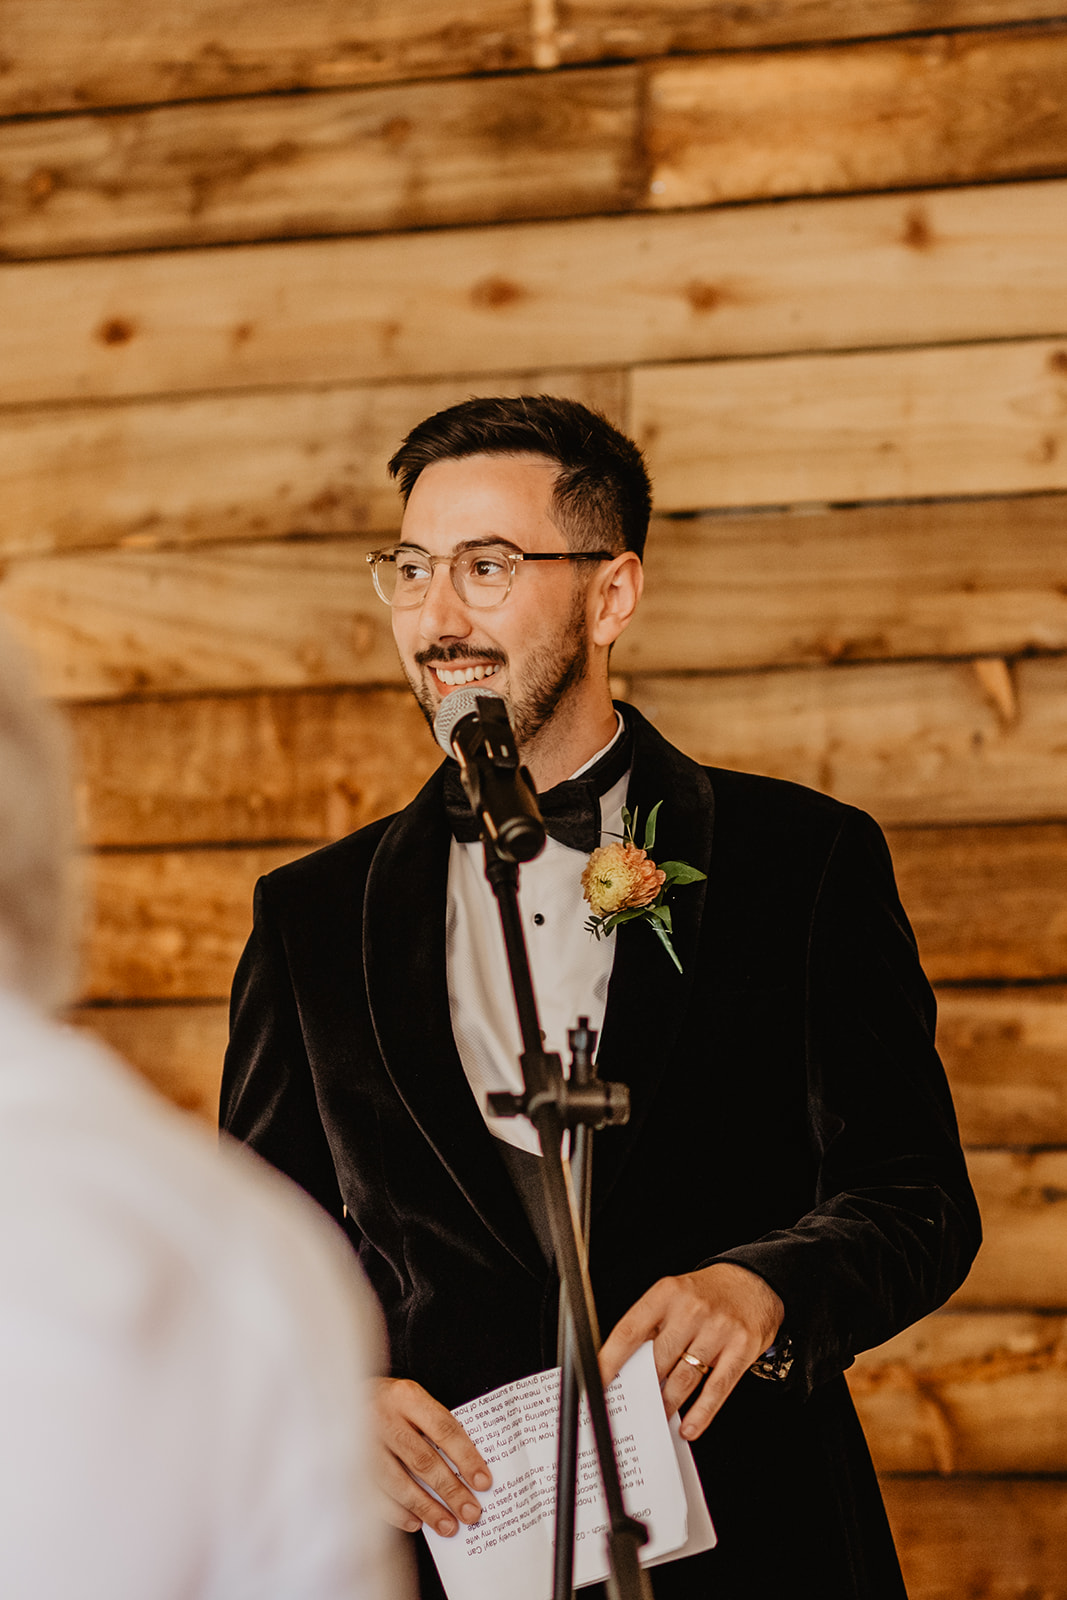 Speeches at a Southlands barn wedding, Sussex. Photo by OliveJoy Photography.